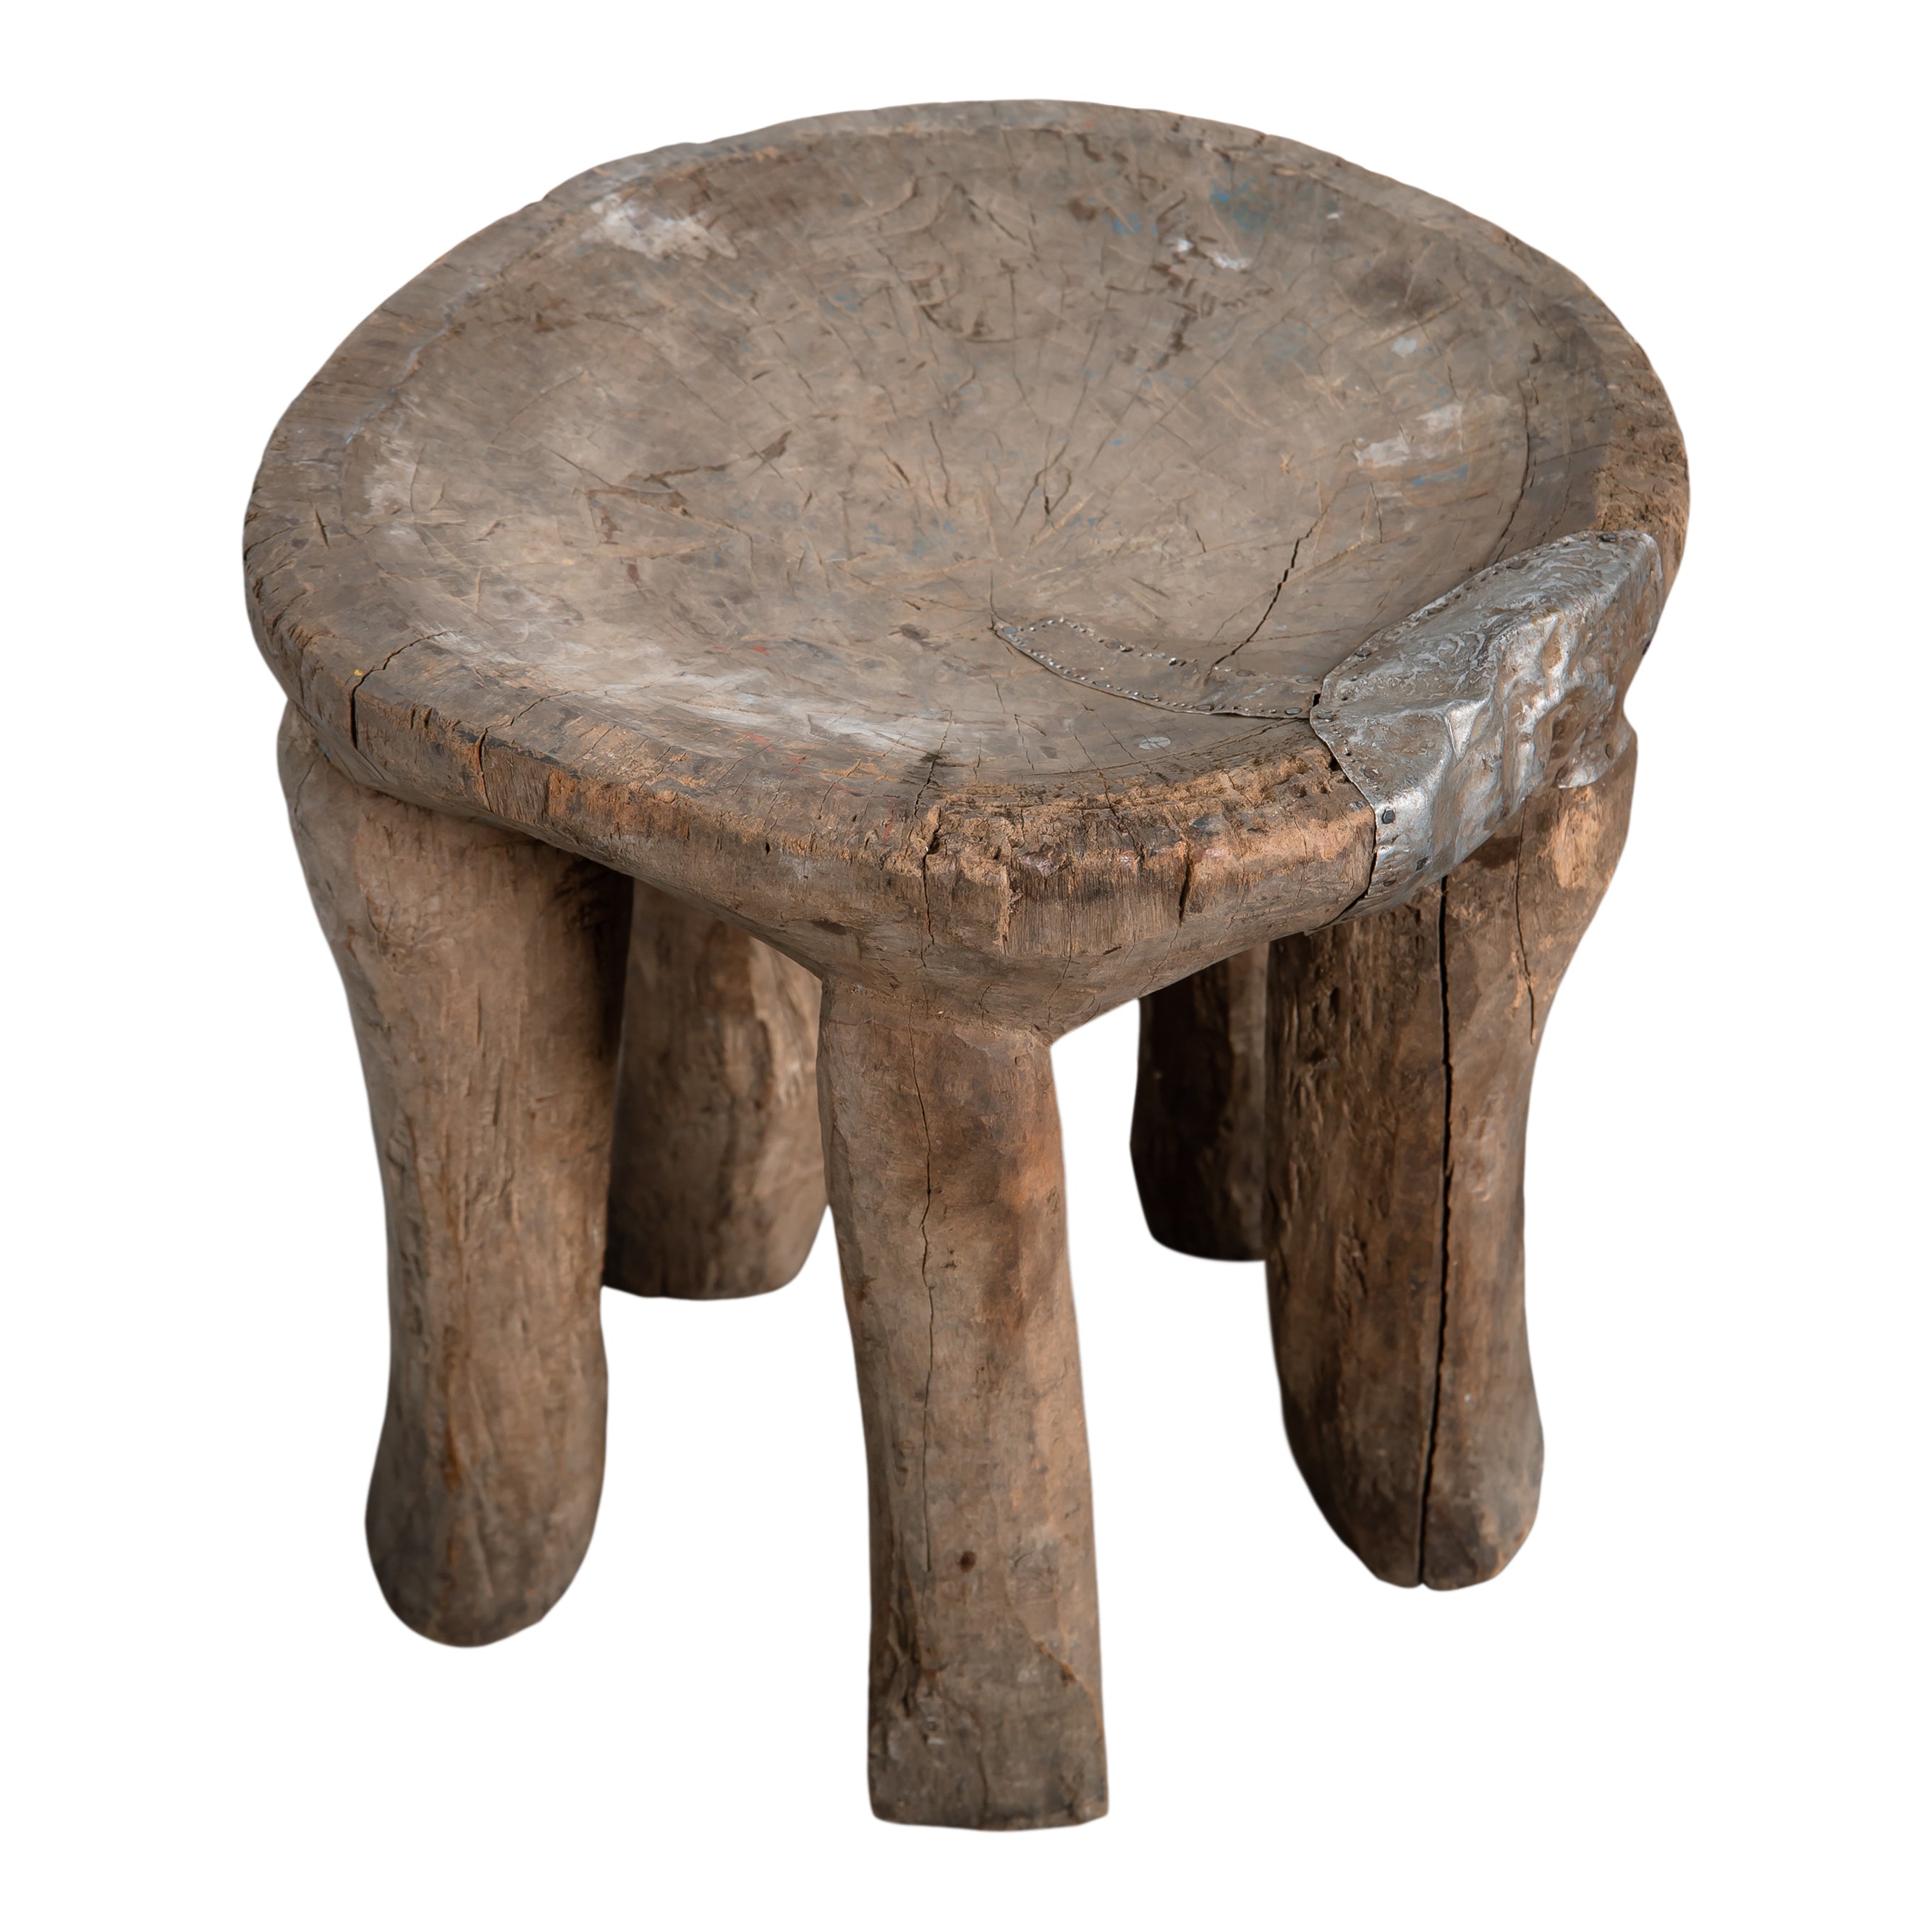 Colter Stool #8